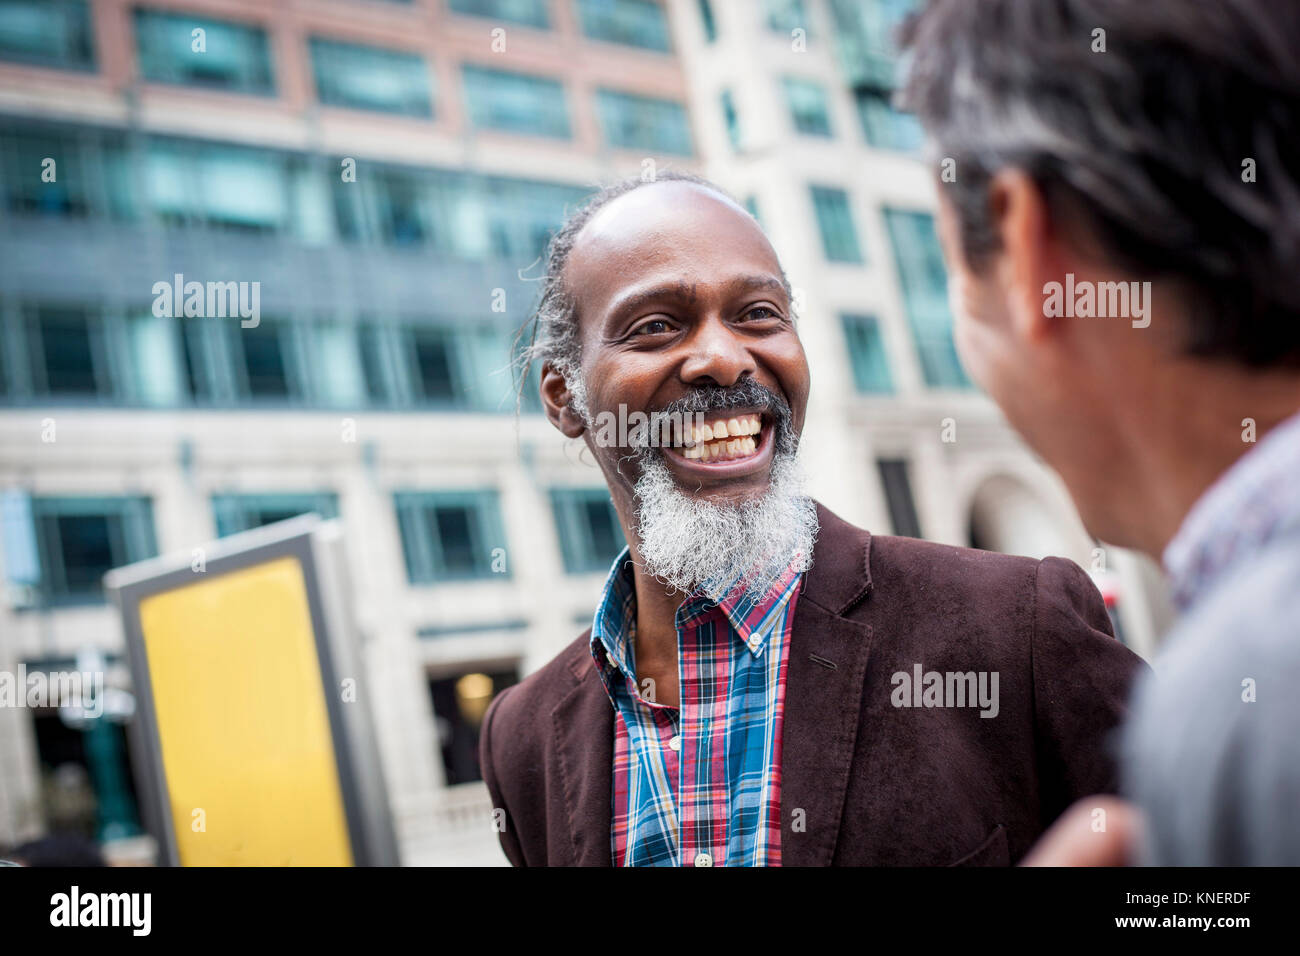 Two mature men outdoors, laughing together Stock Photo